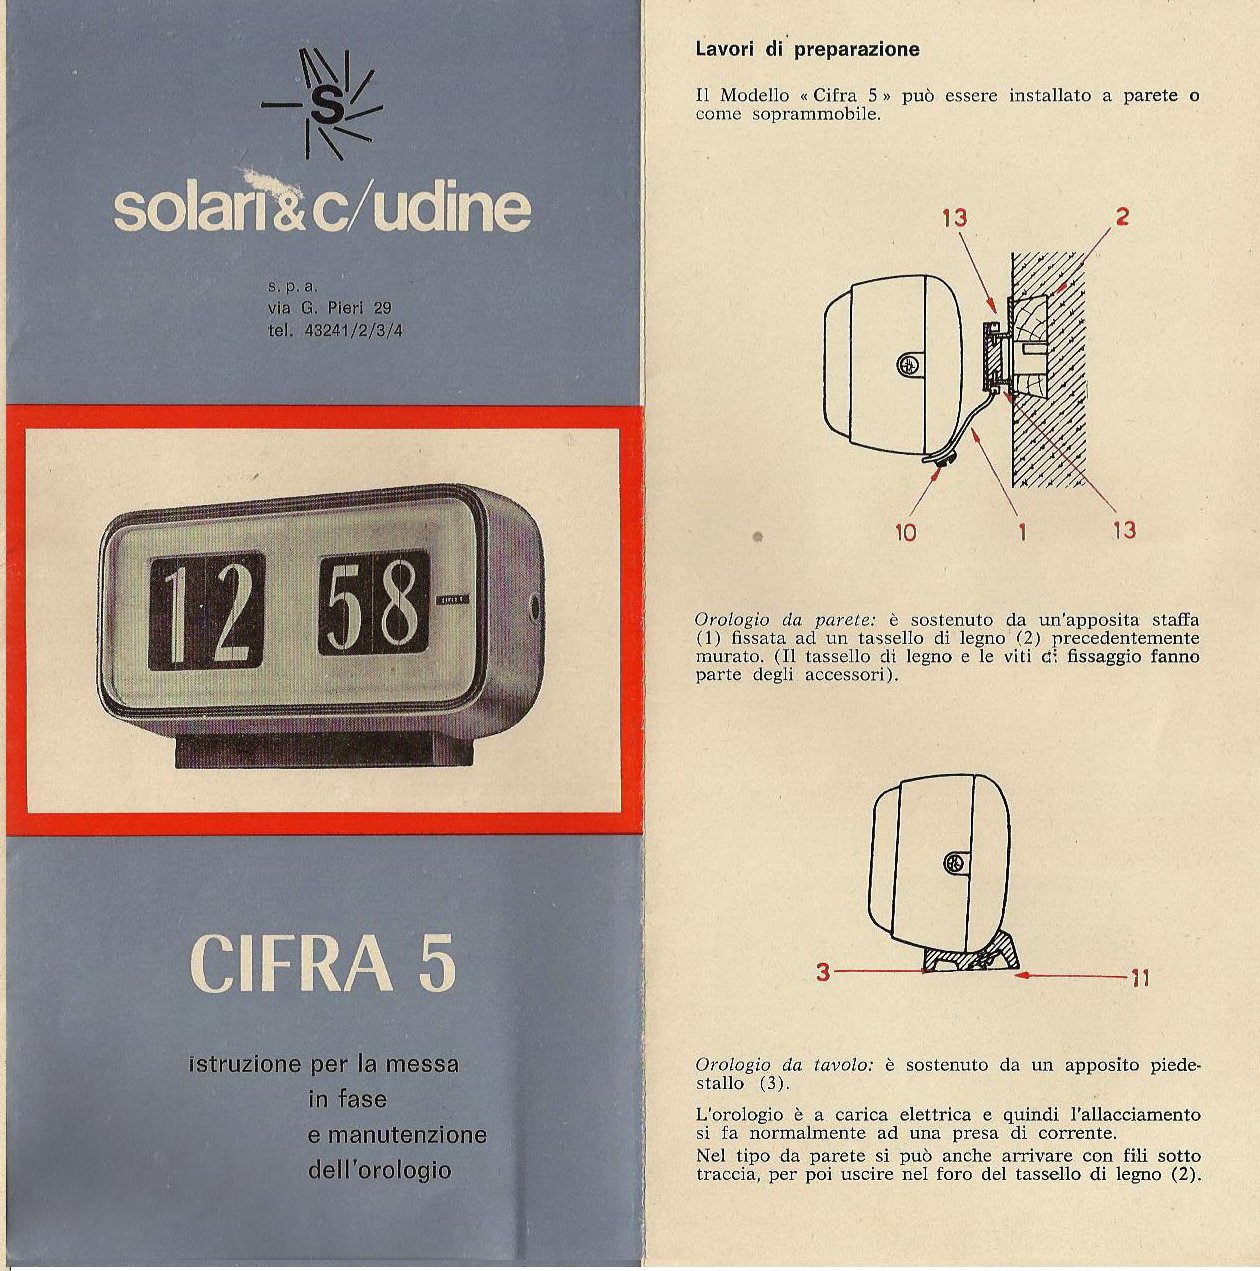 The Cifra 5 manual